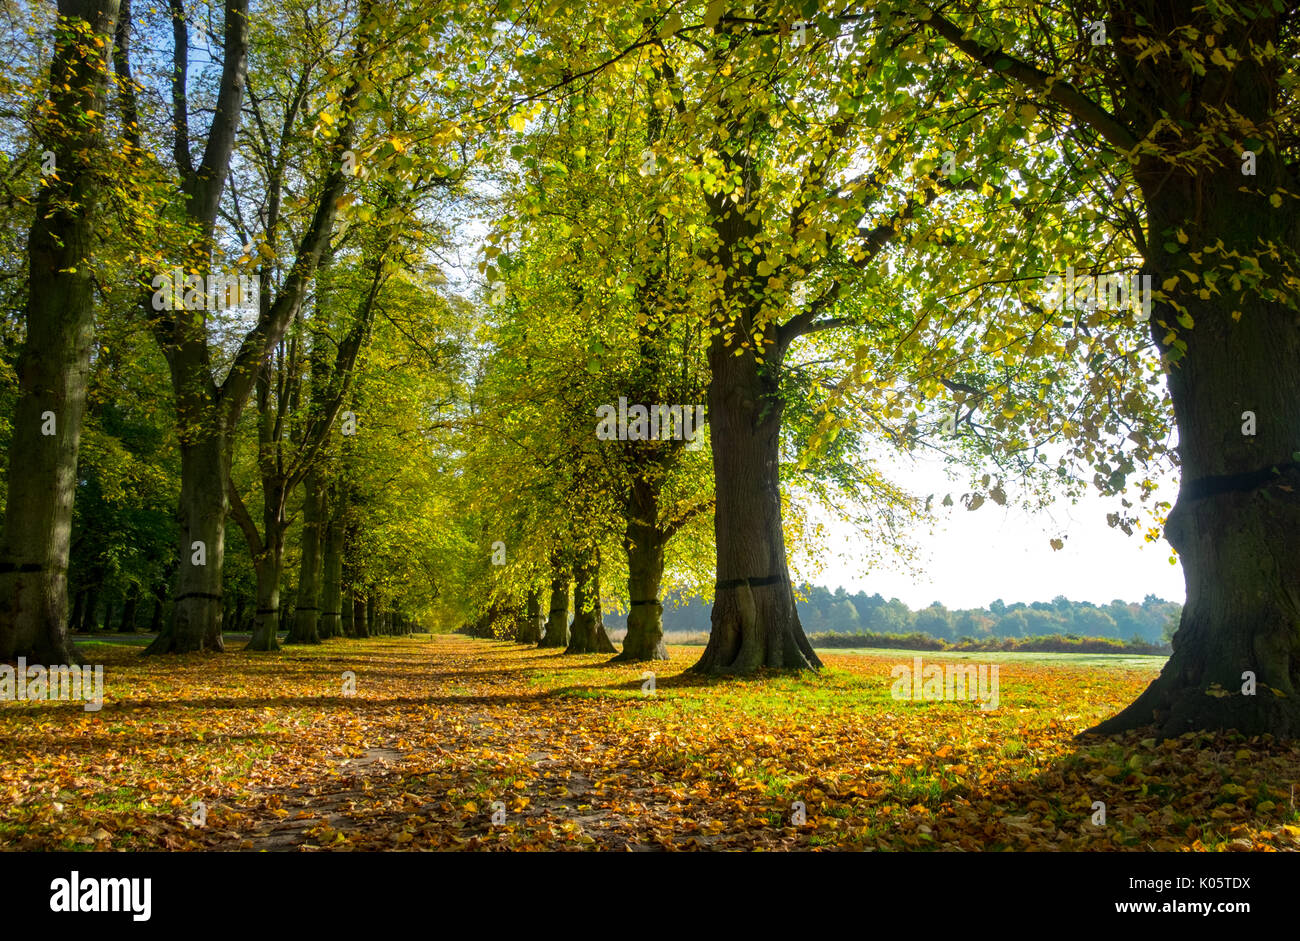 Lime tree avenue at Clumber Park in autumn Stock Photo